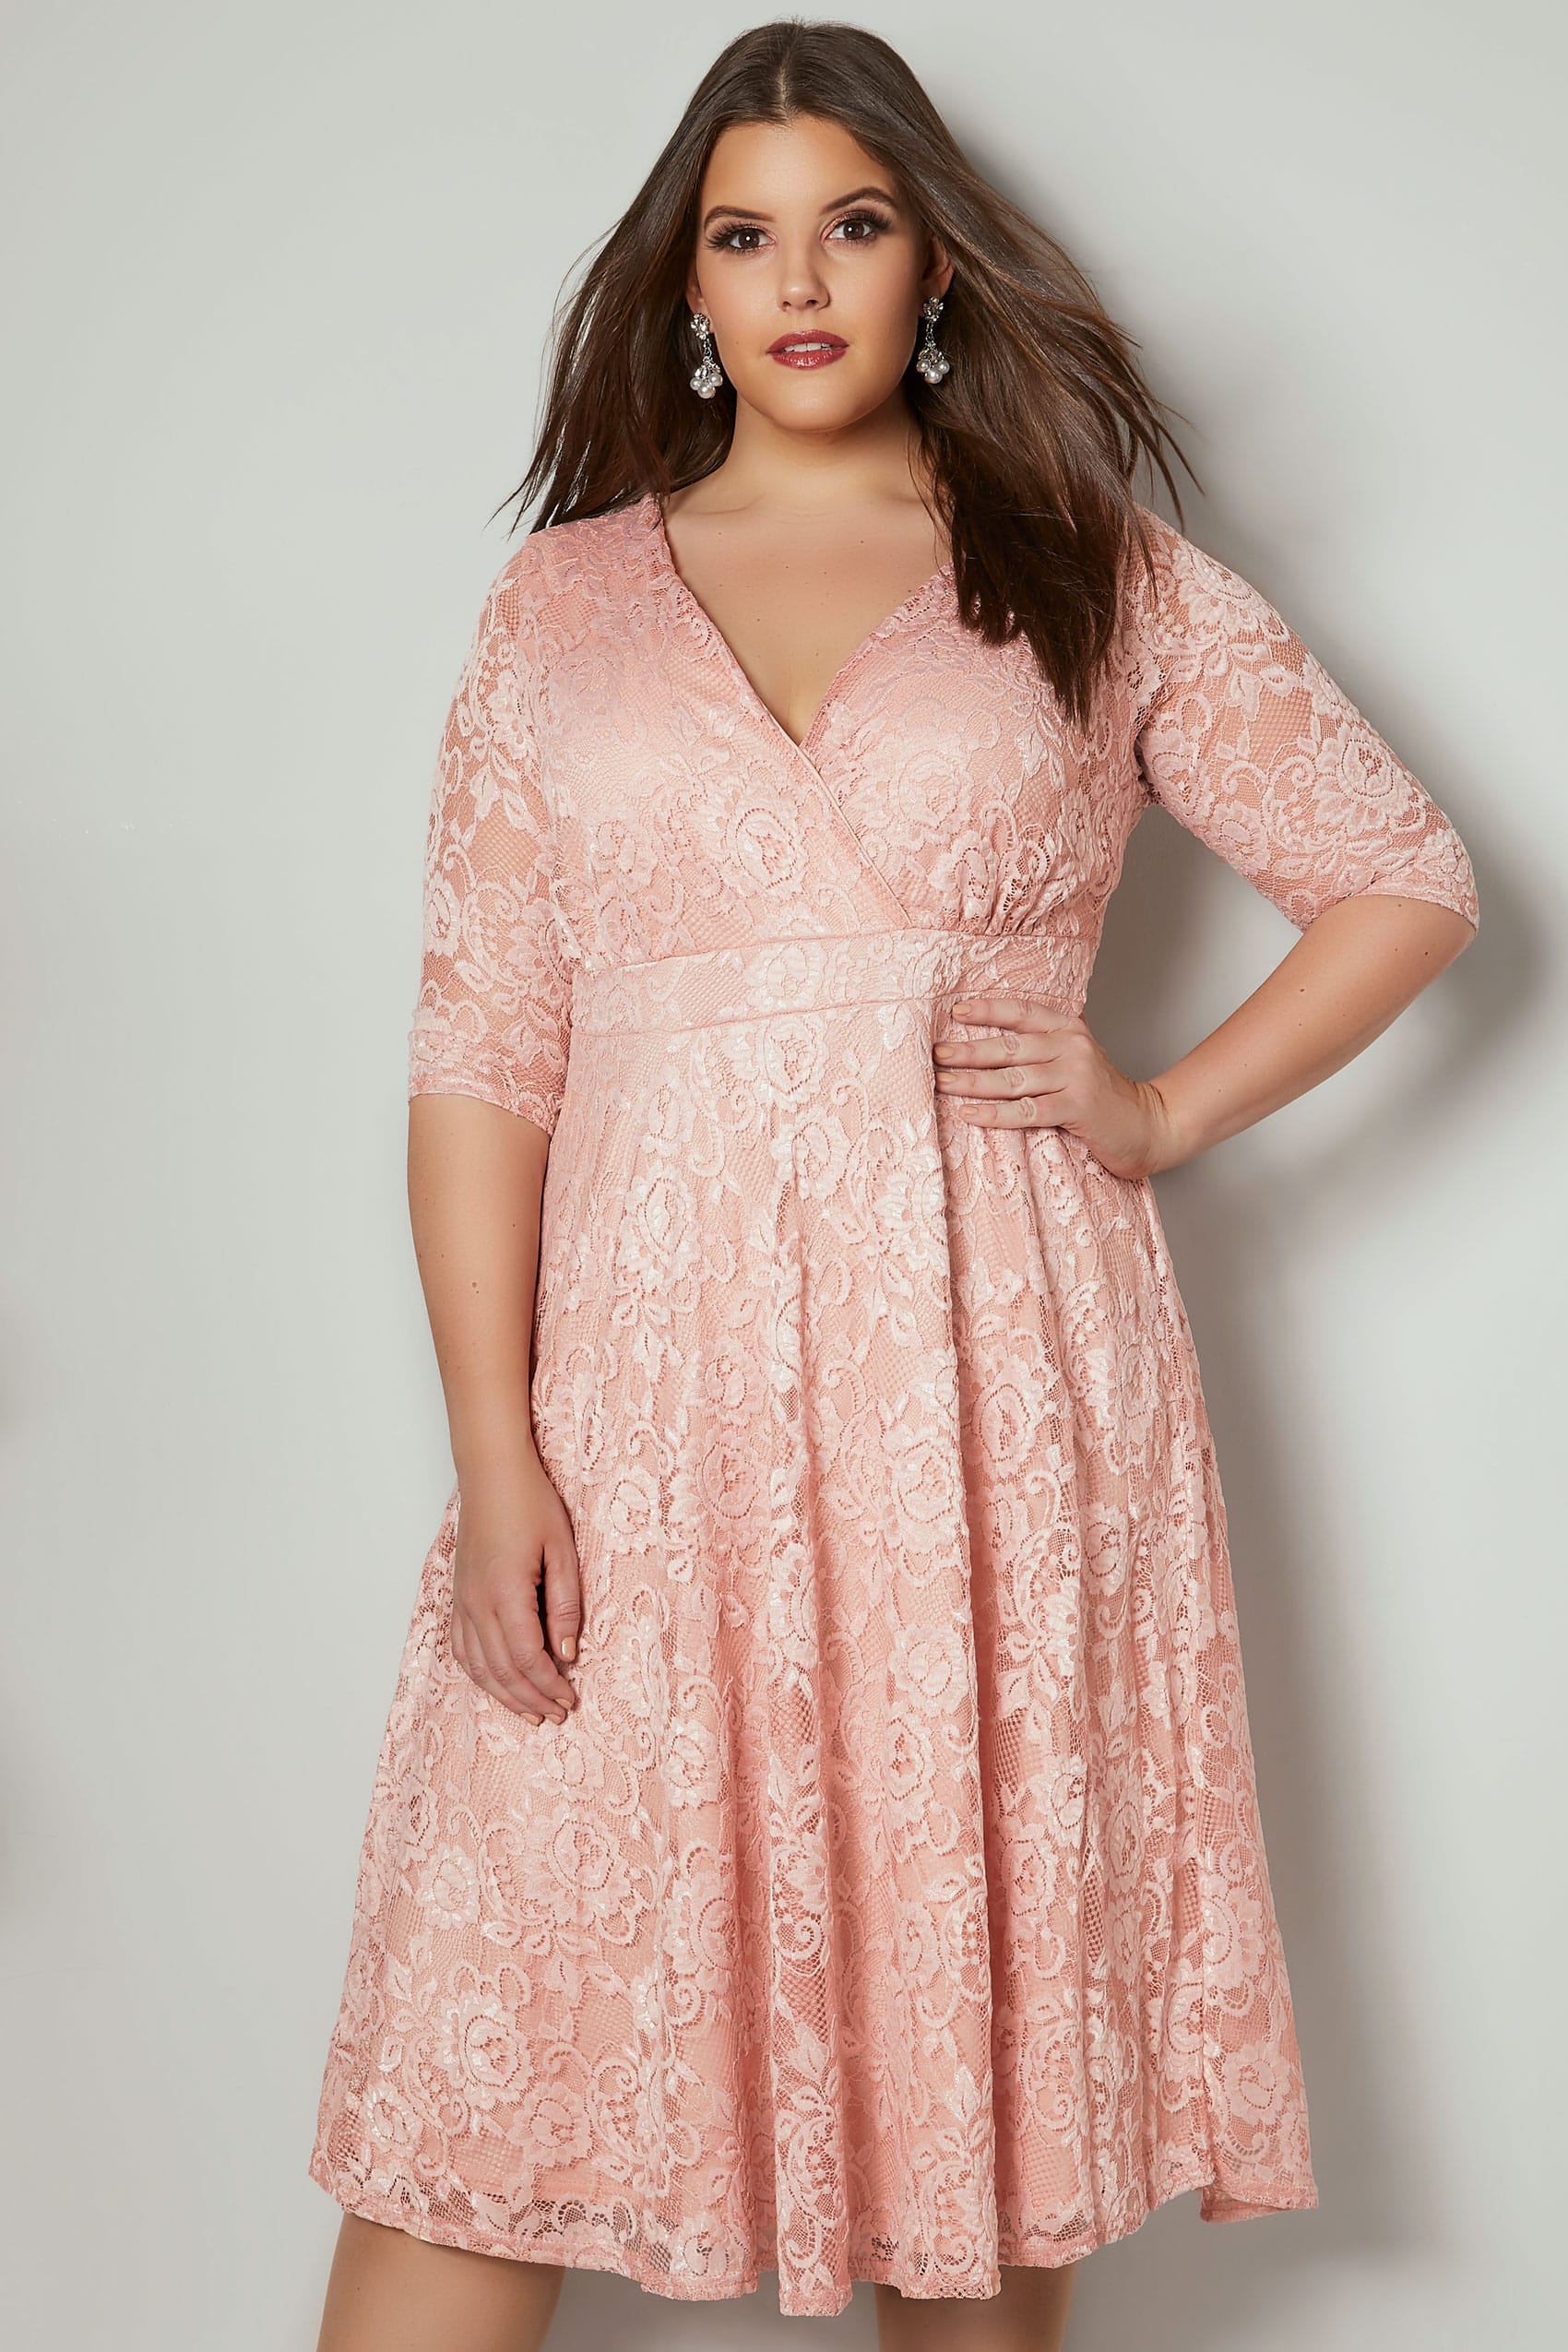 YOURS LONDON Pink Floral Lace Wrap Dress, plus size 16 to 32